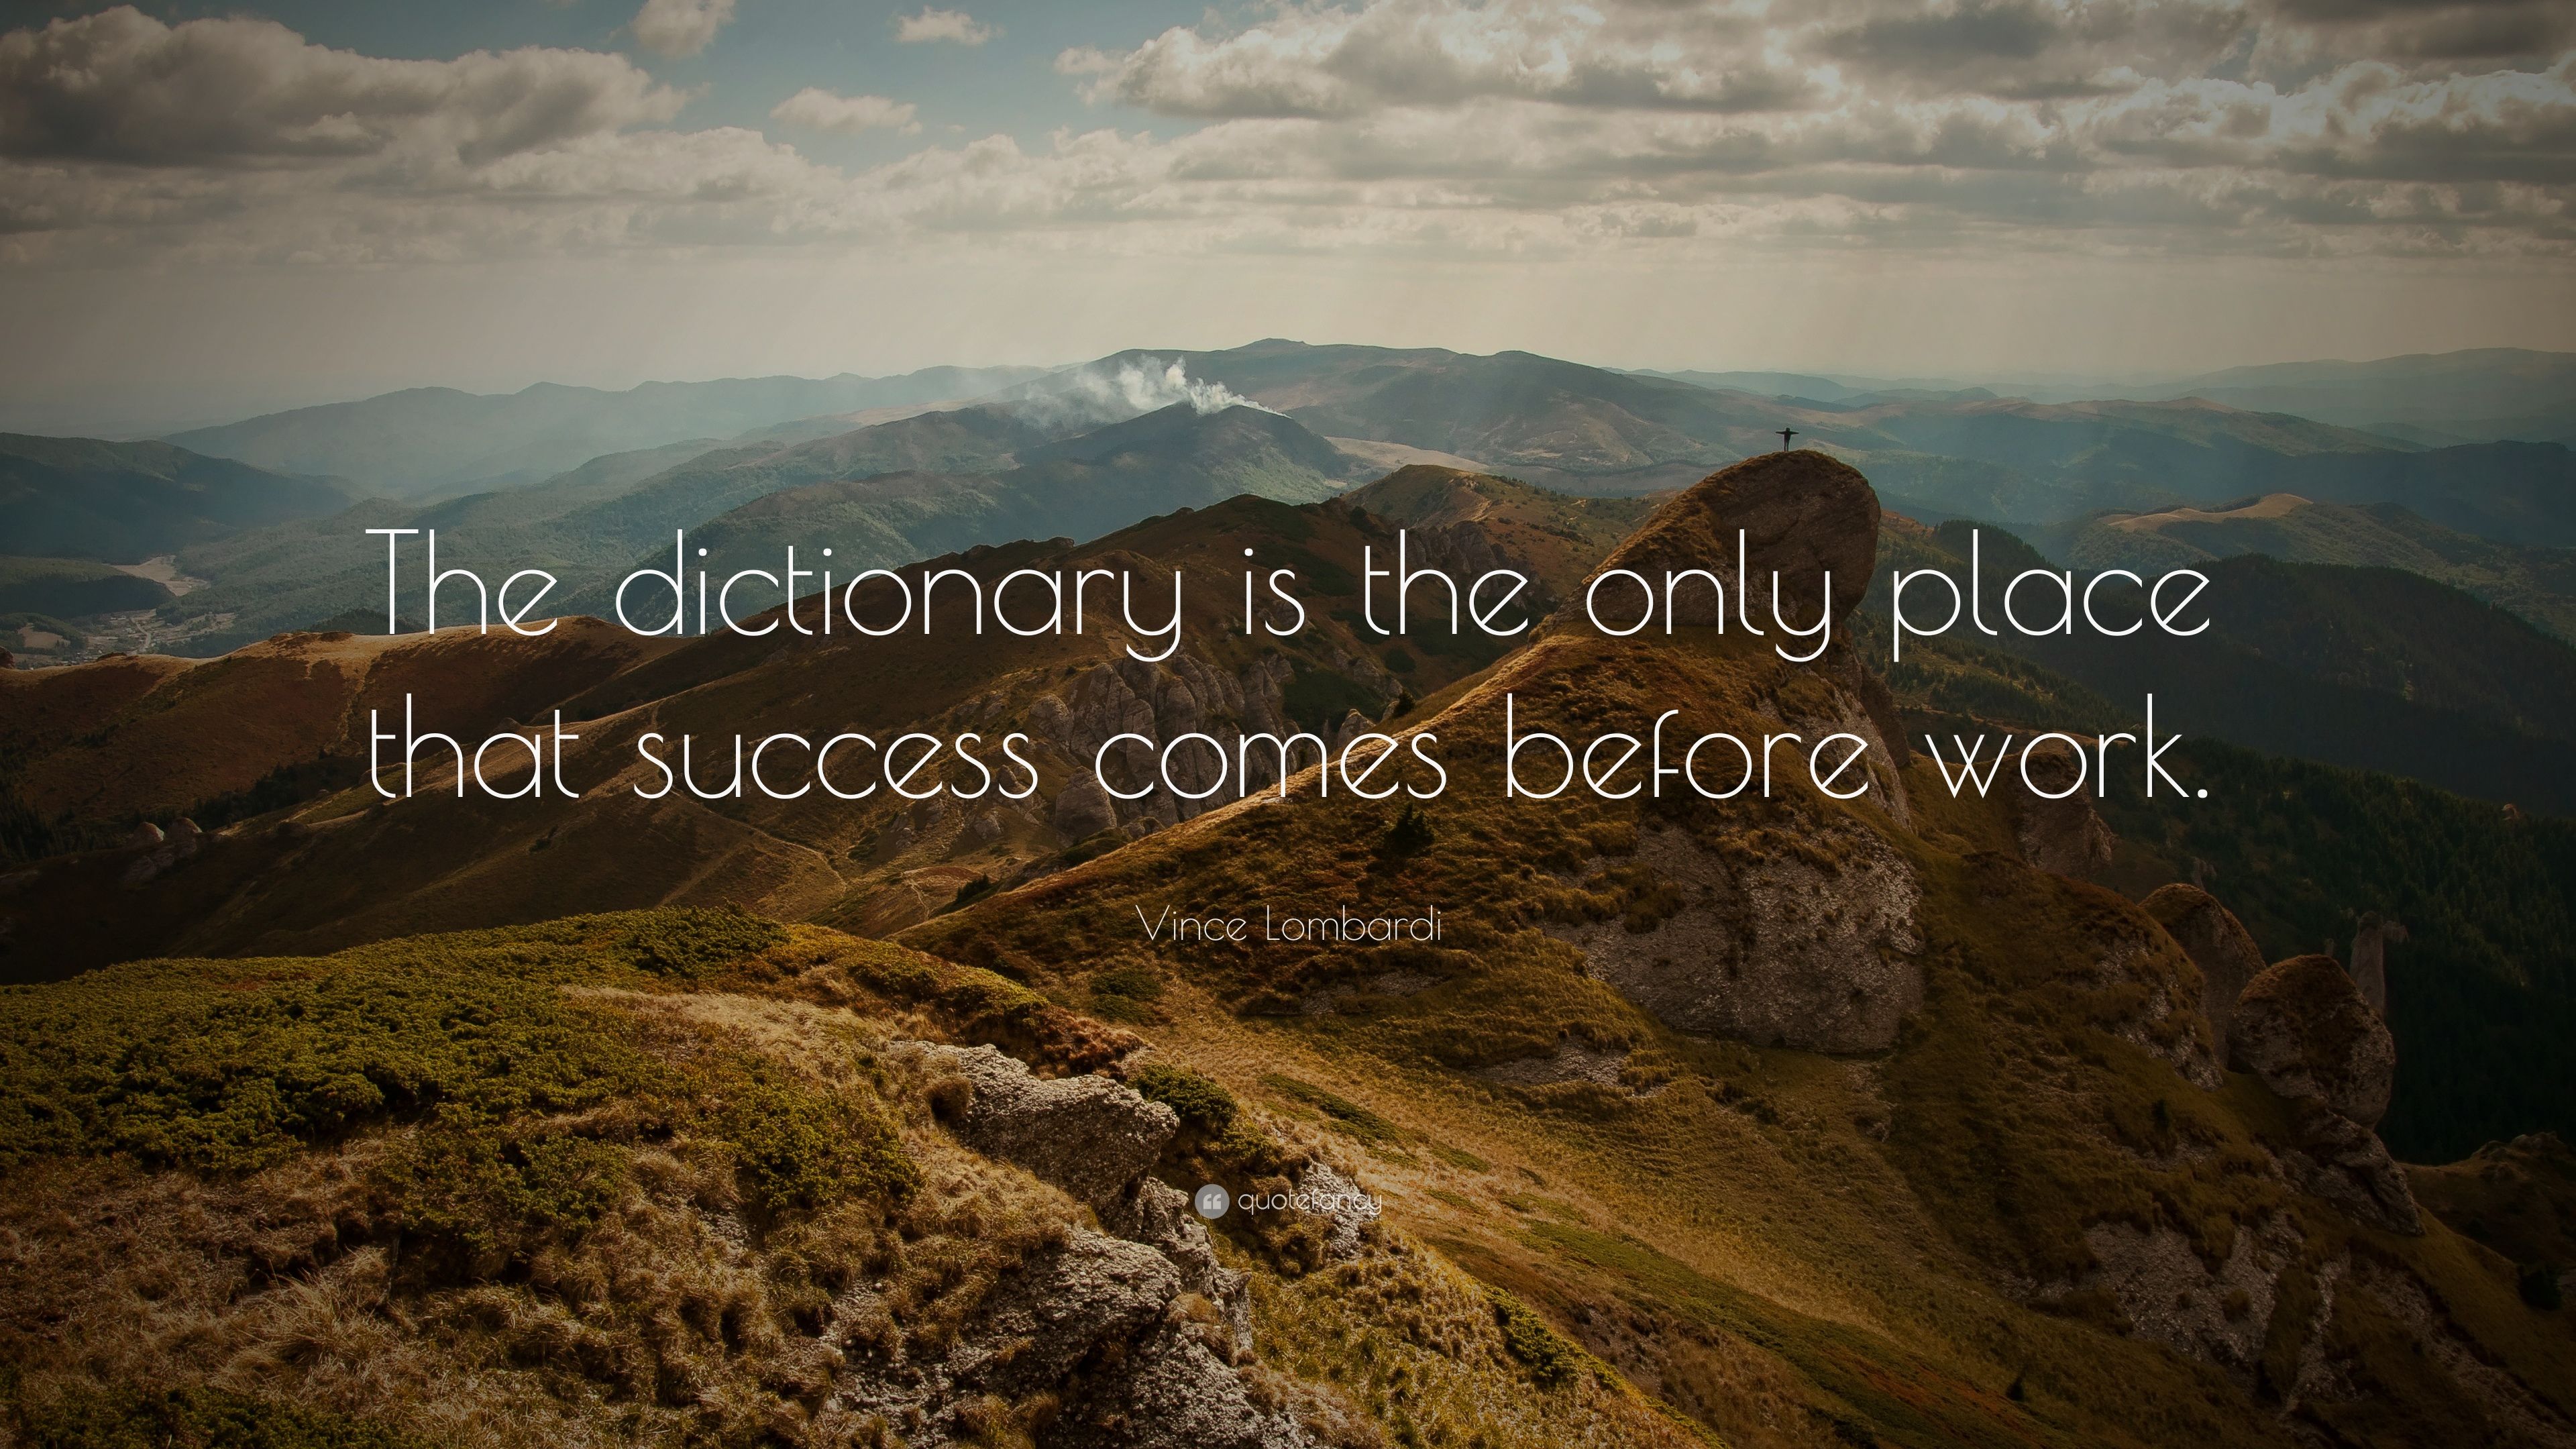 Vince Lombardi Quote: “The dictionary is the only place that success